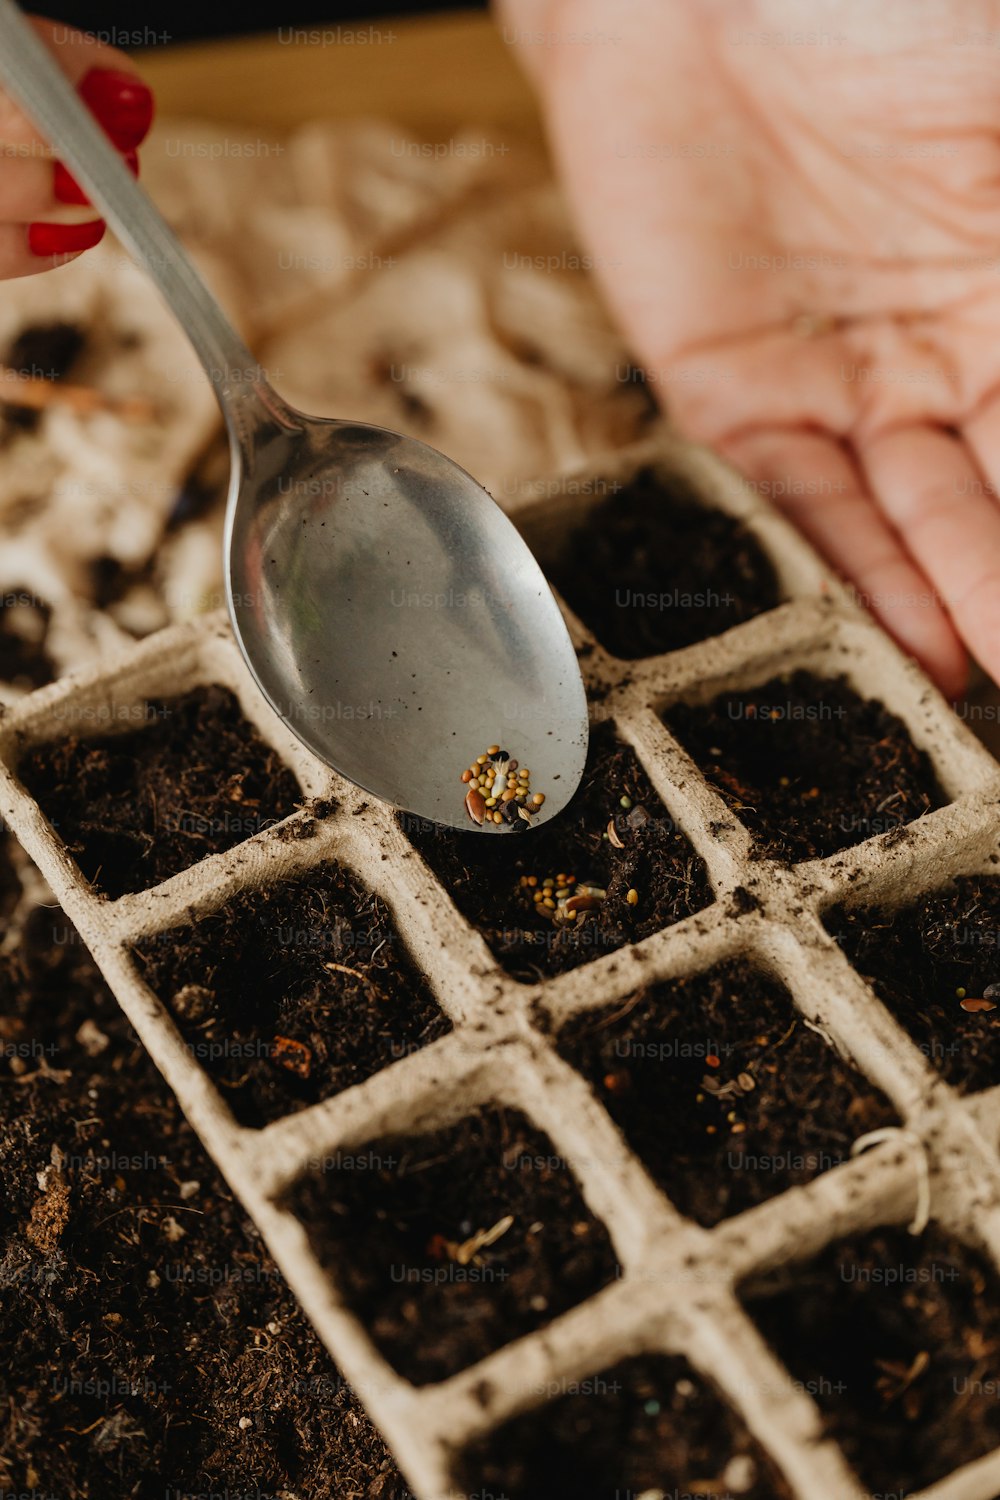 a person spooning seeds out of a tray of dirt